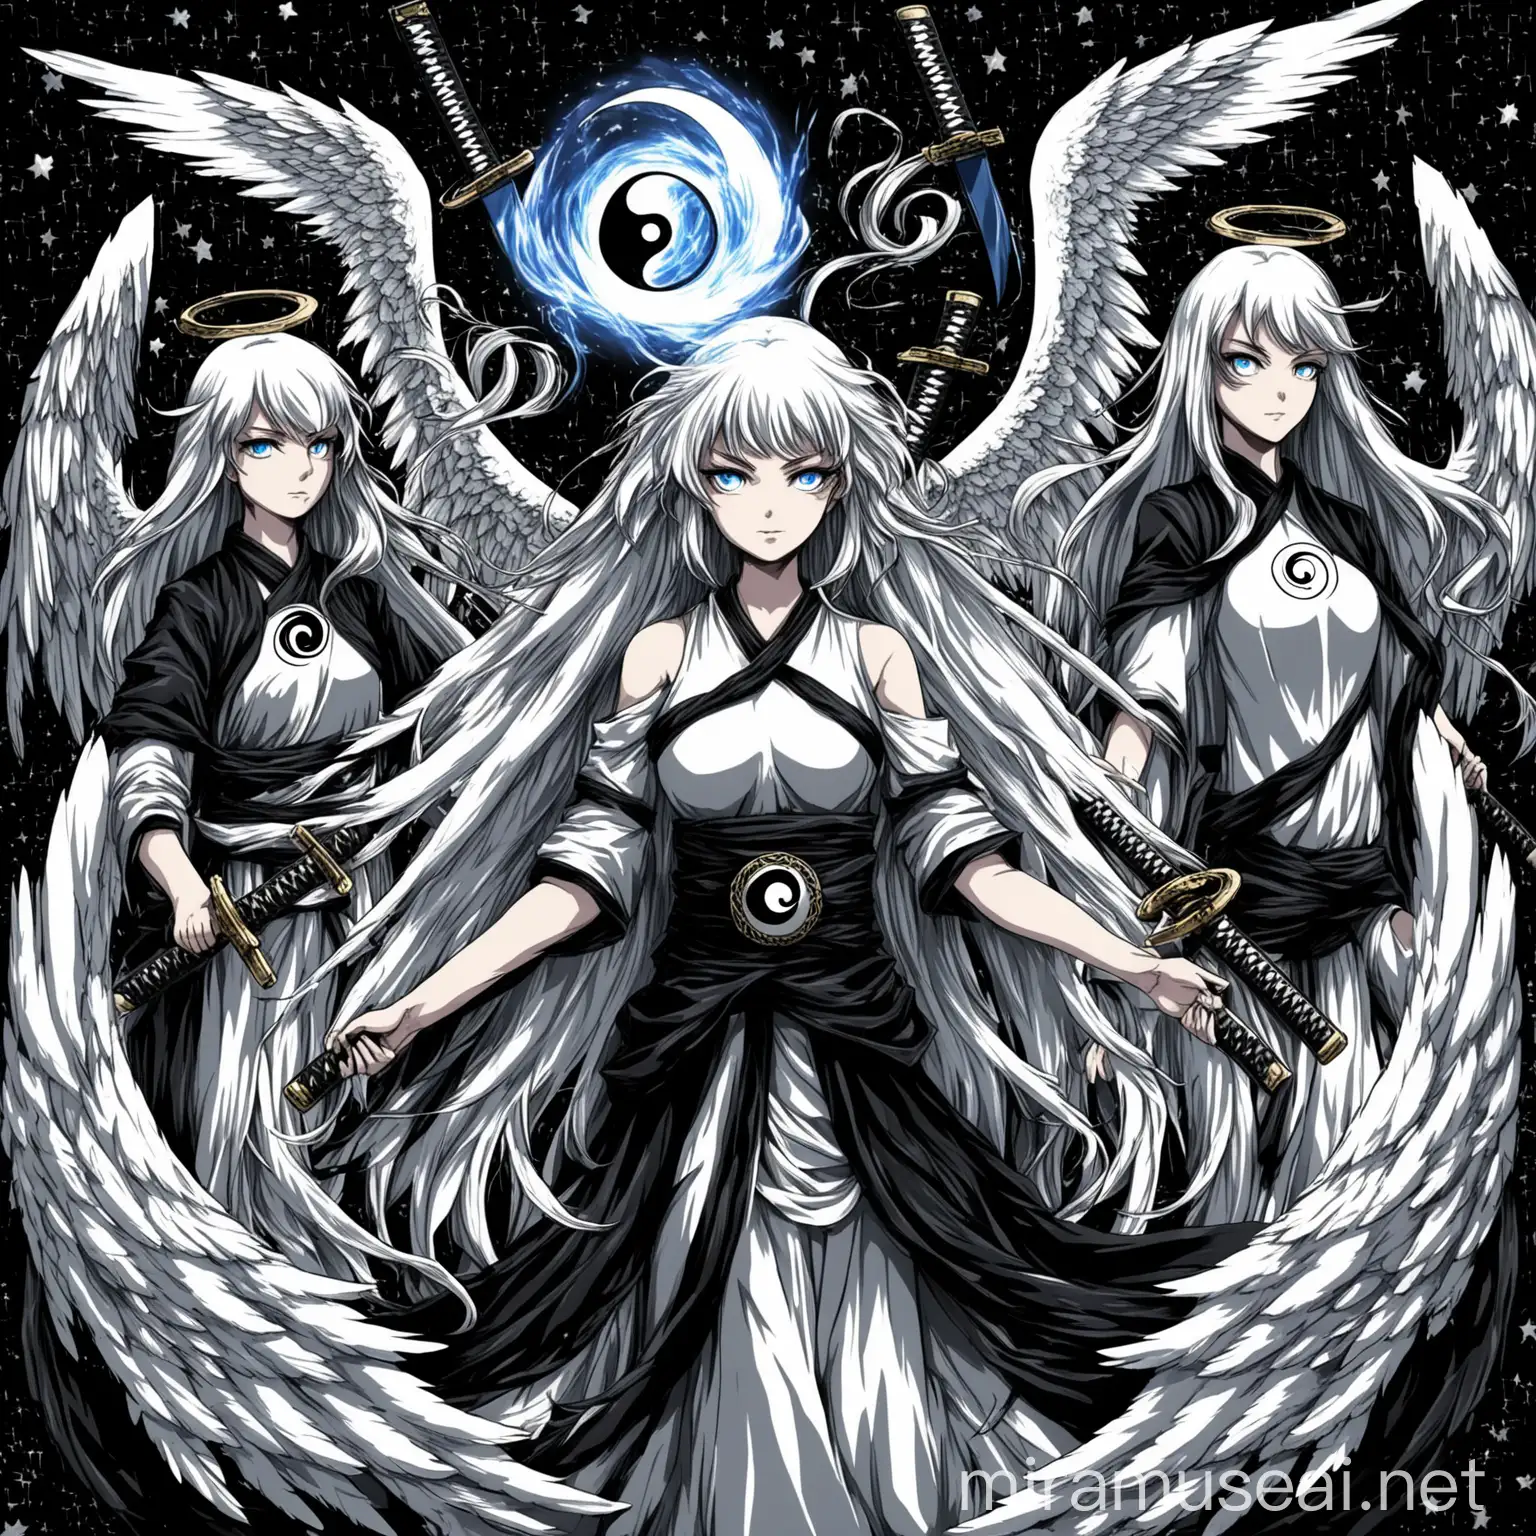 Duality and Destiny Anime Girl with Yin Yang Katanas and Angelic Wings in Magical Battlefield